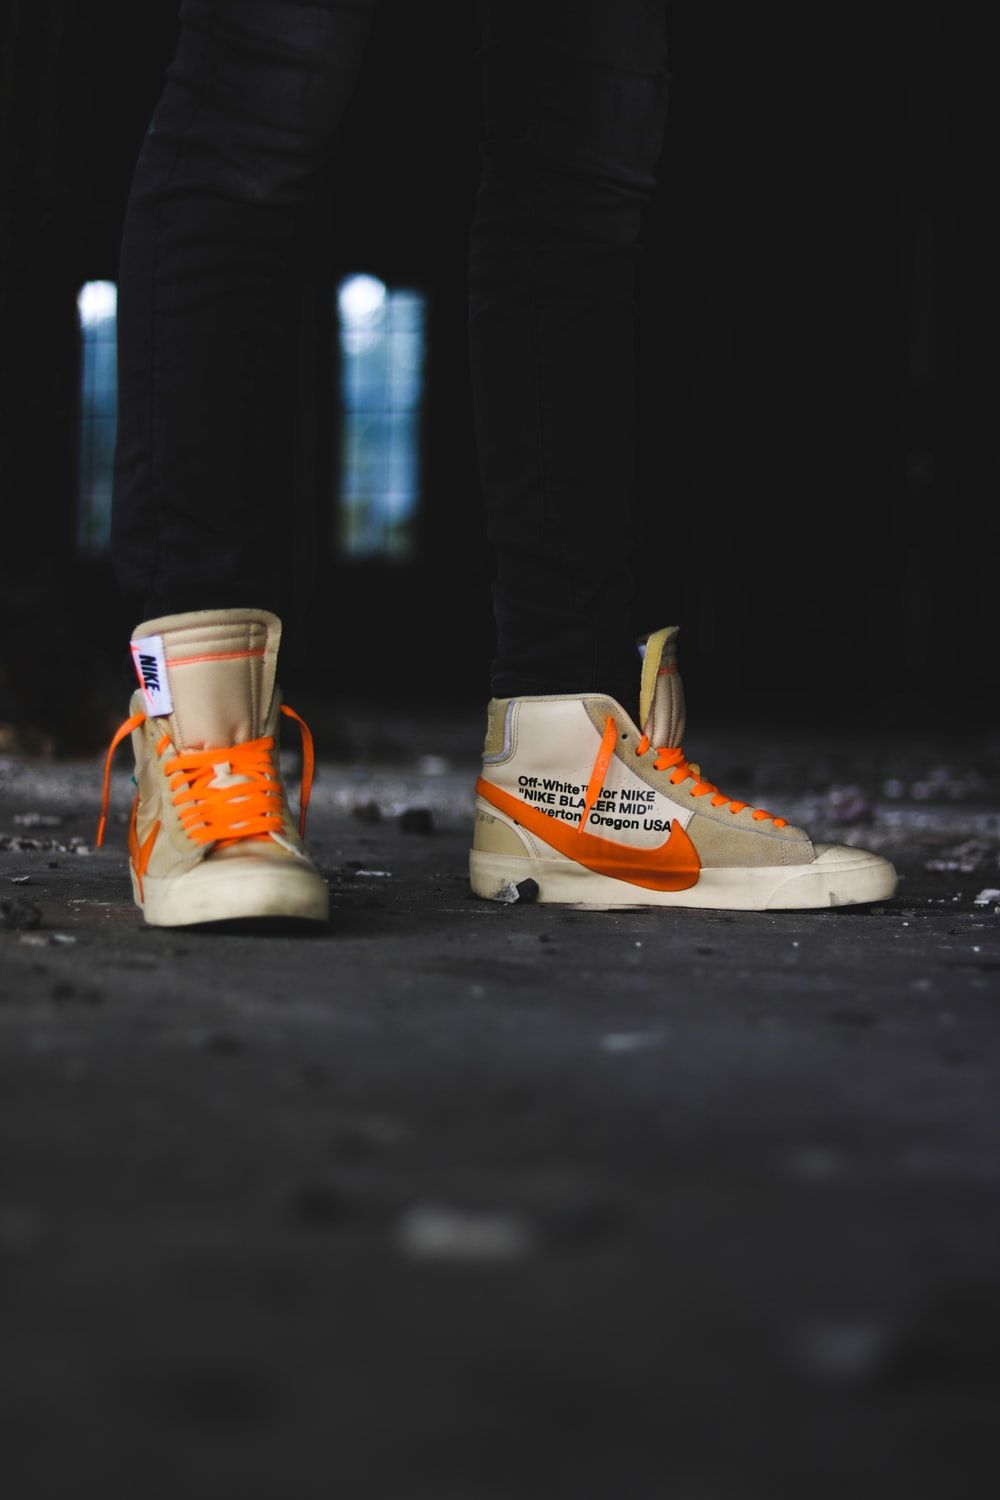 Off White Sneaker Picture. Download Free Image